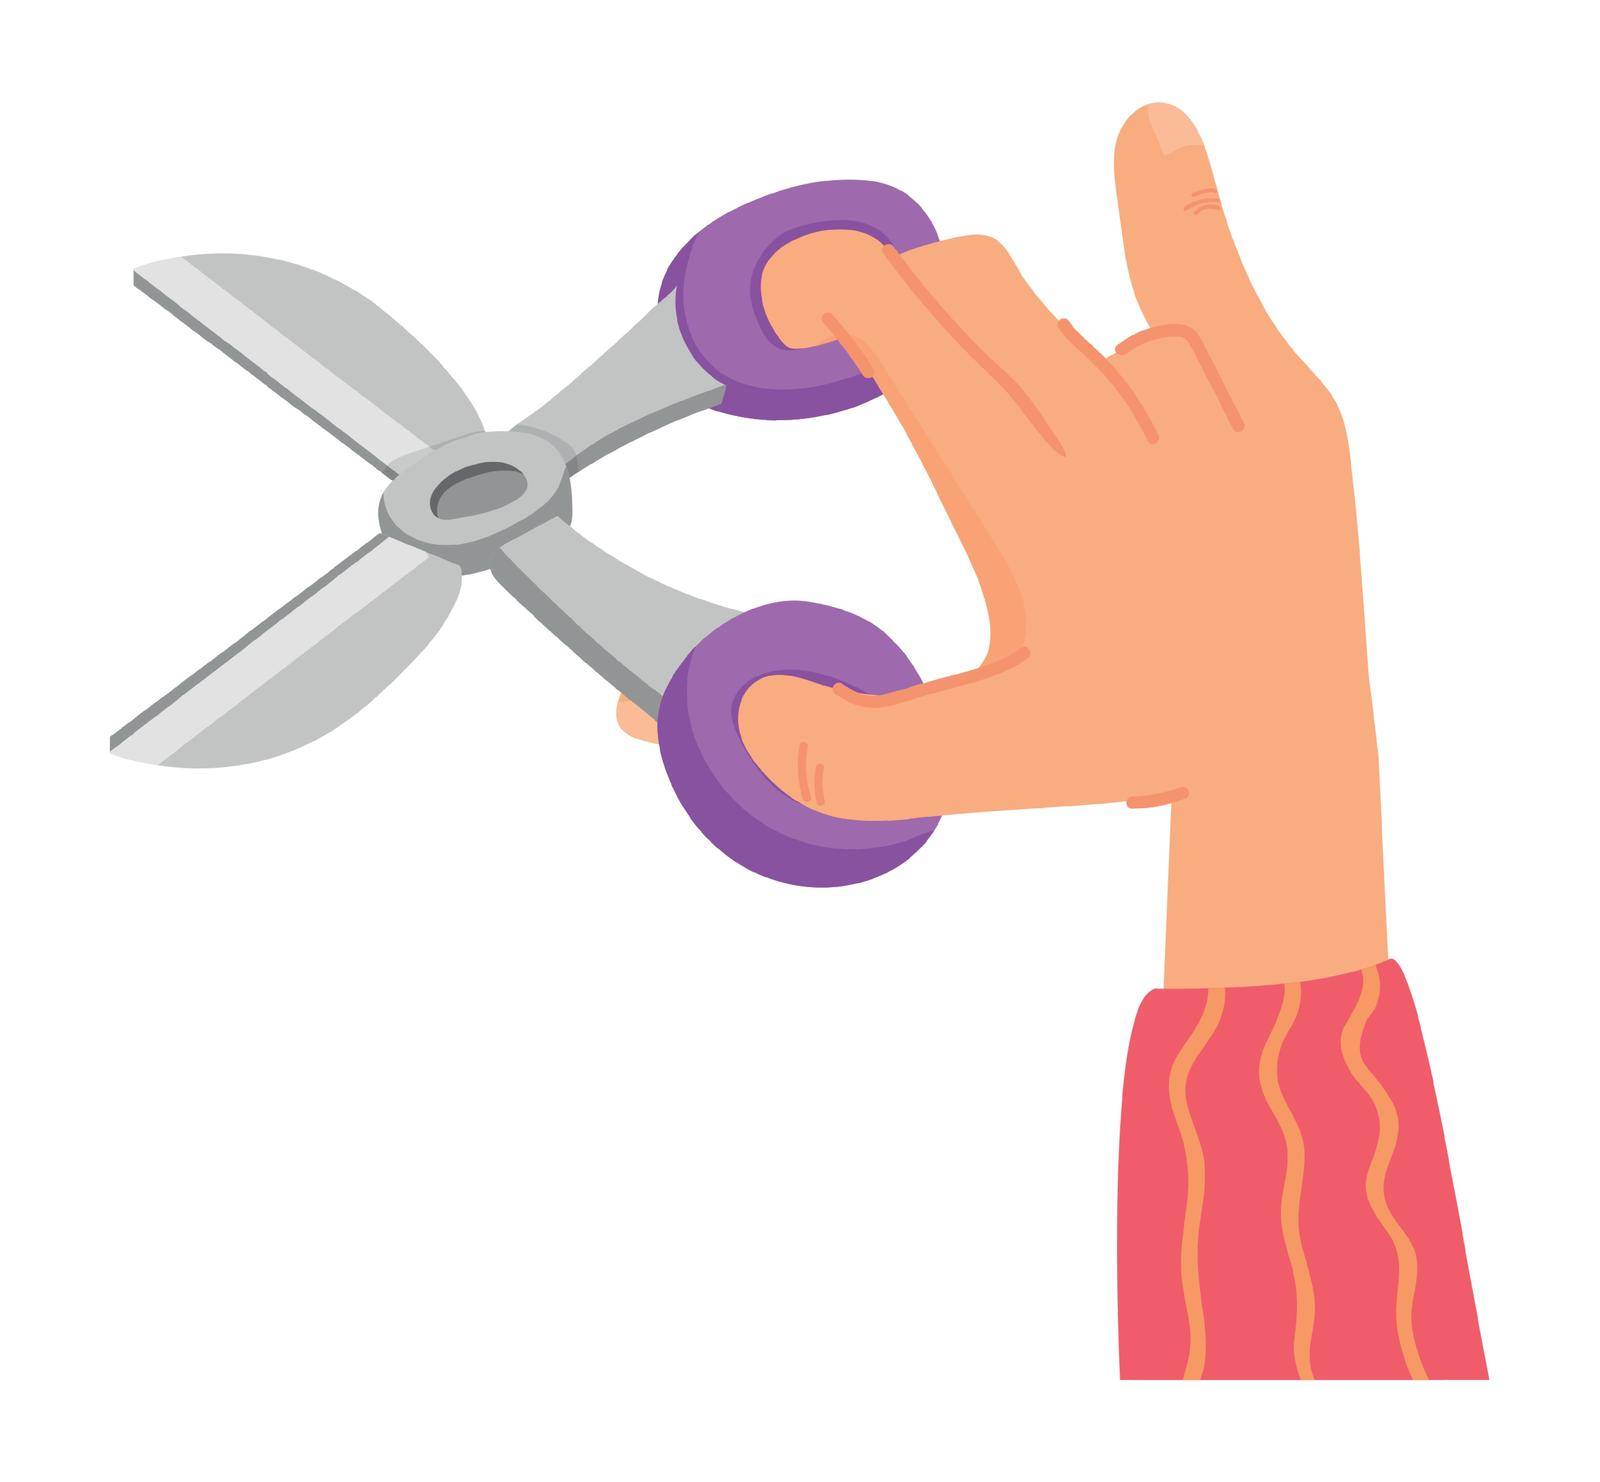 Hand holding open scissors. Cutting icon in cartoon style by LadadikArt